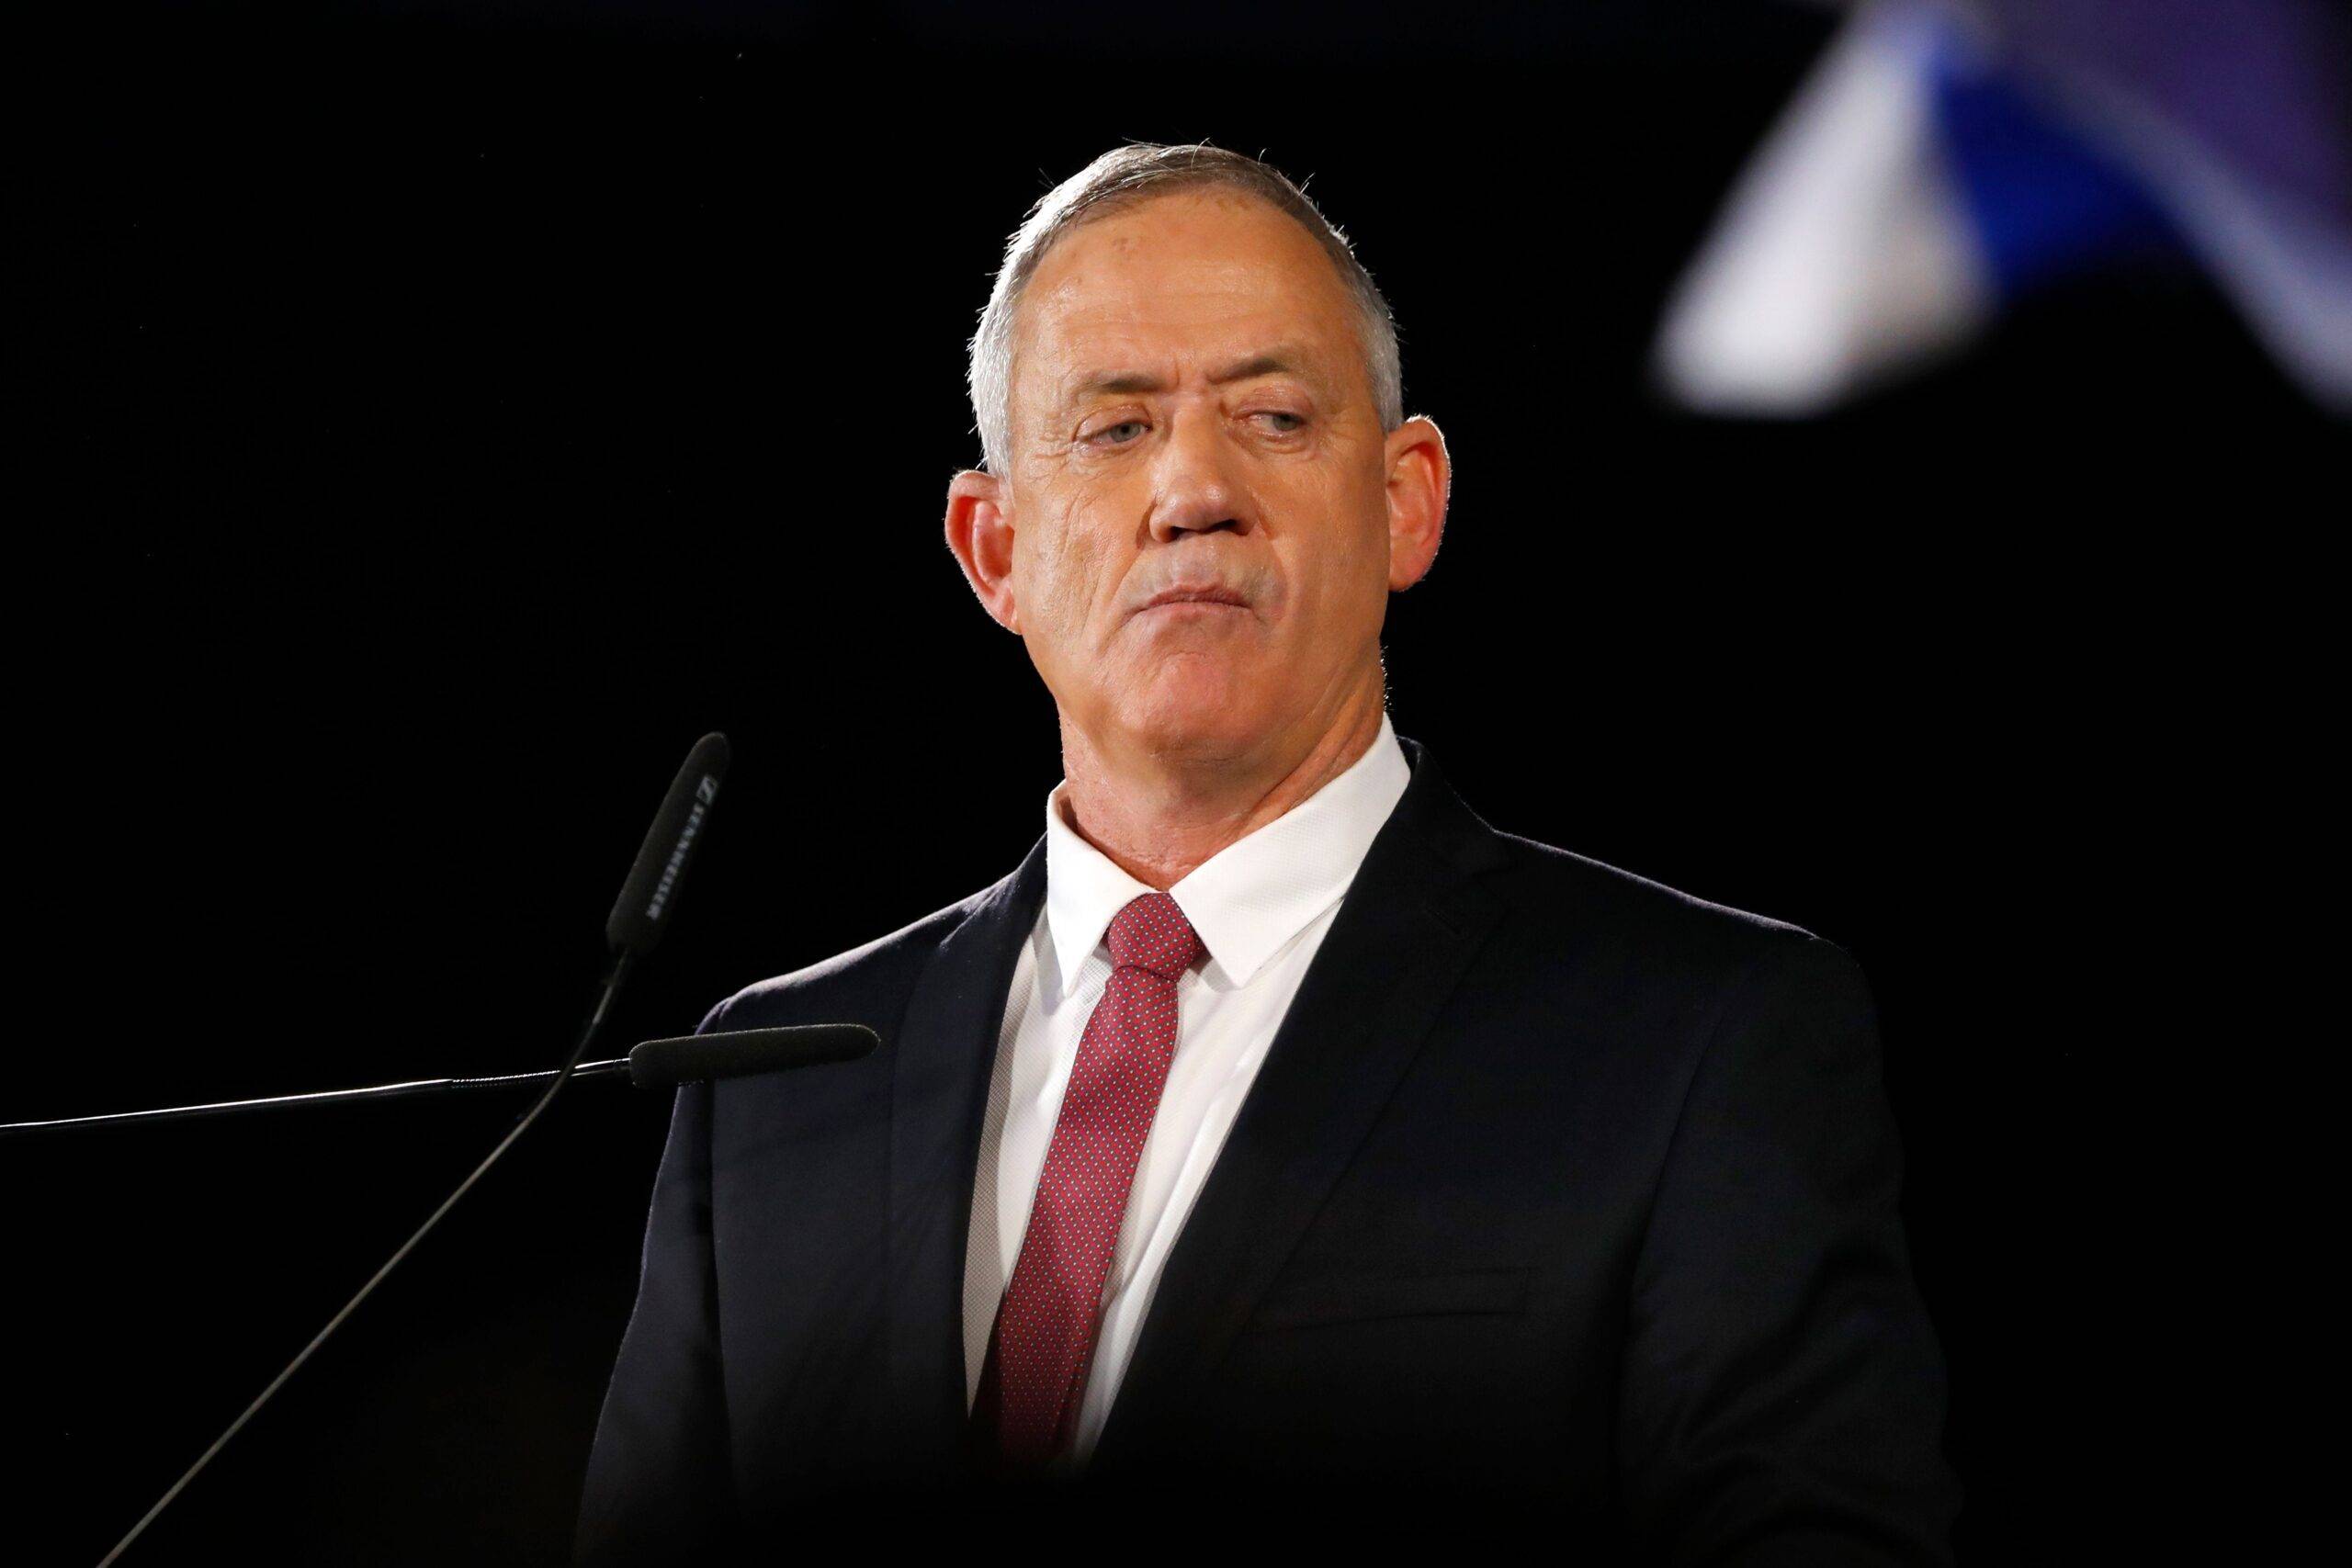 Benny Gantz, former Israeli military chief of staff, and presidential candidate, speaks during an electoral campaign gathering on 19 February 2019, in Tel Aviv [JACK GUEZ/AFP/Getty Images]